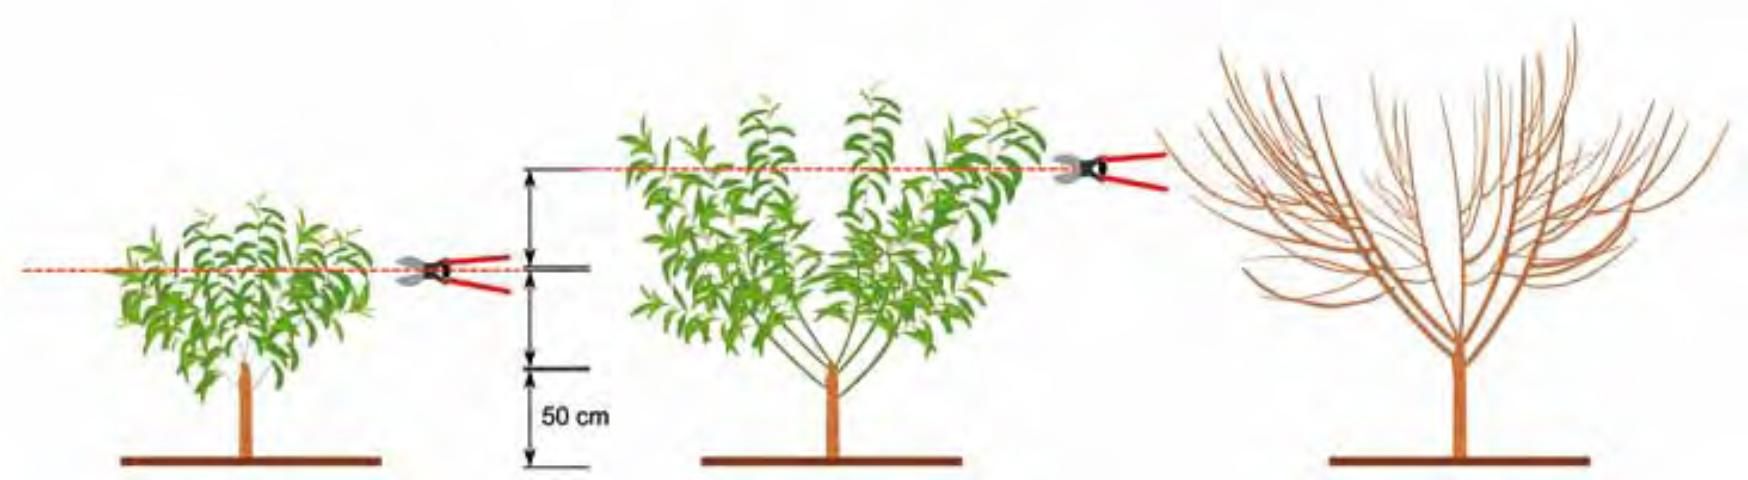 Figure 4. First manual topping is applied at about 40 inches (100 cm) above the soil. Center: Second manual topping is applied about 60 inches (150 cm) above the soil. Right: tree shape at the end of the first year.